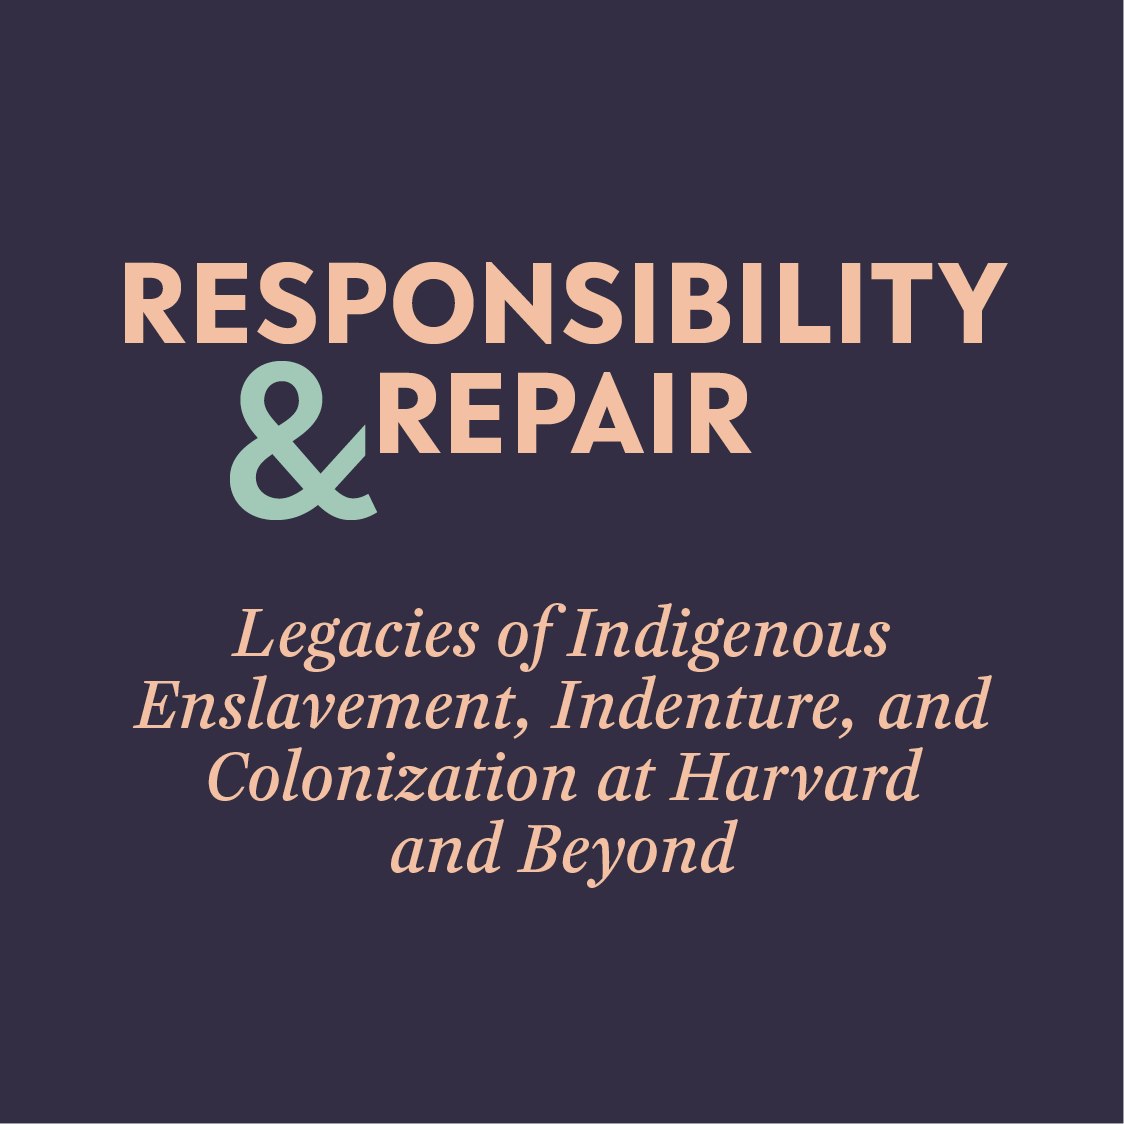 Responsibility And Repair Text Image